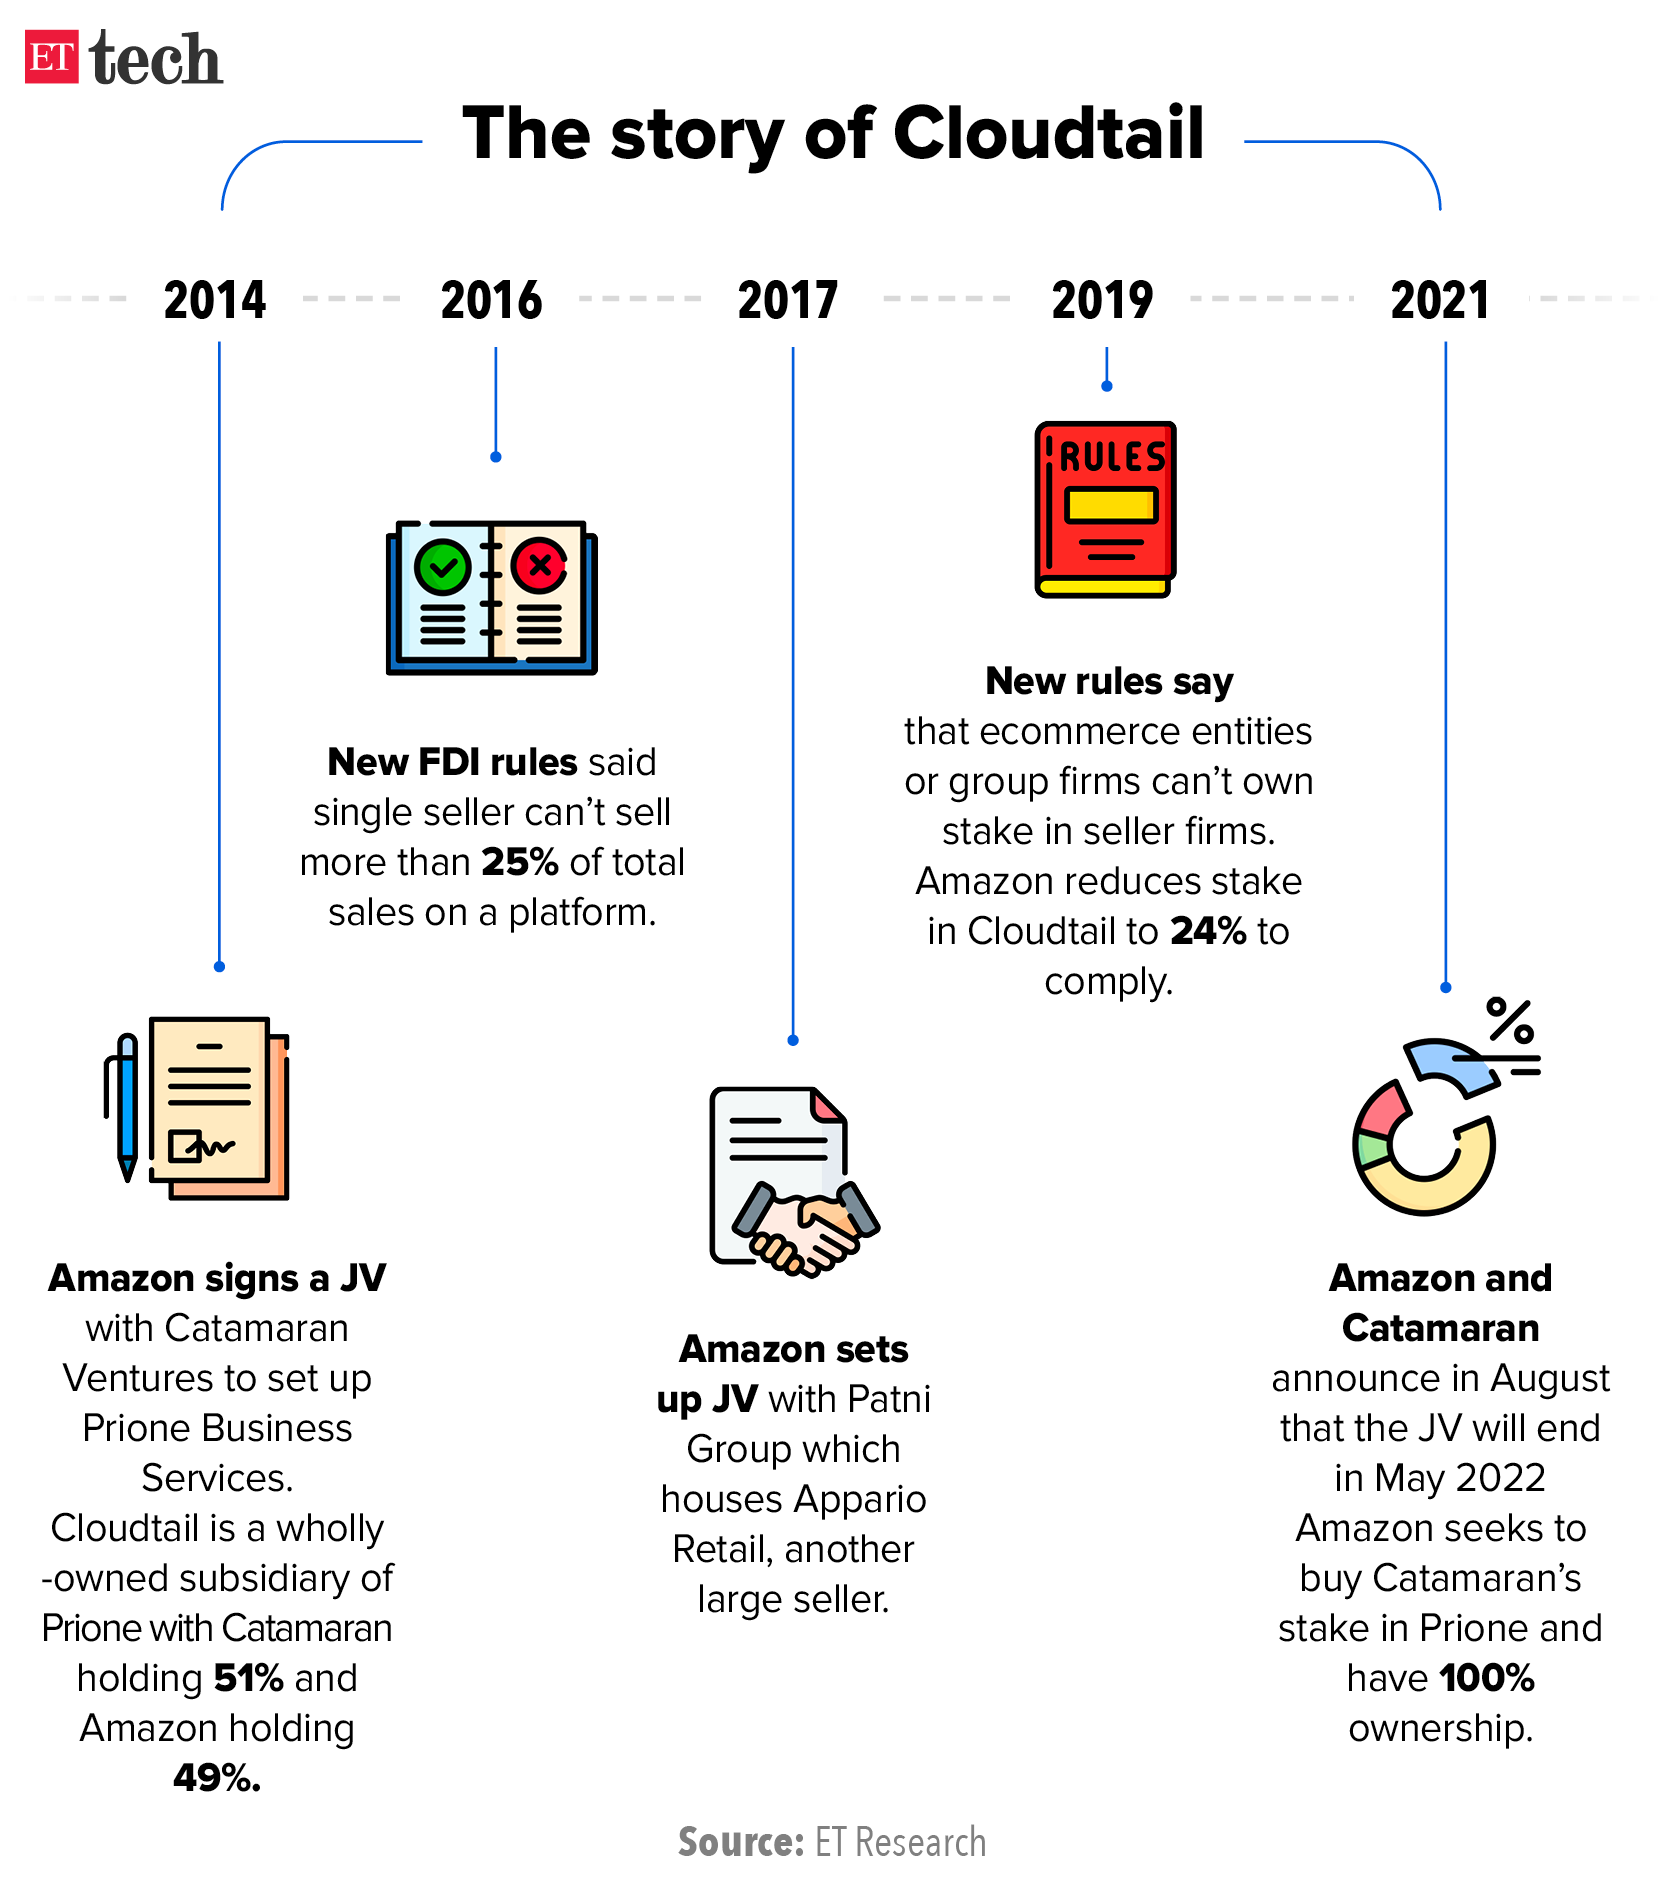 The story of Cloudtail